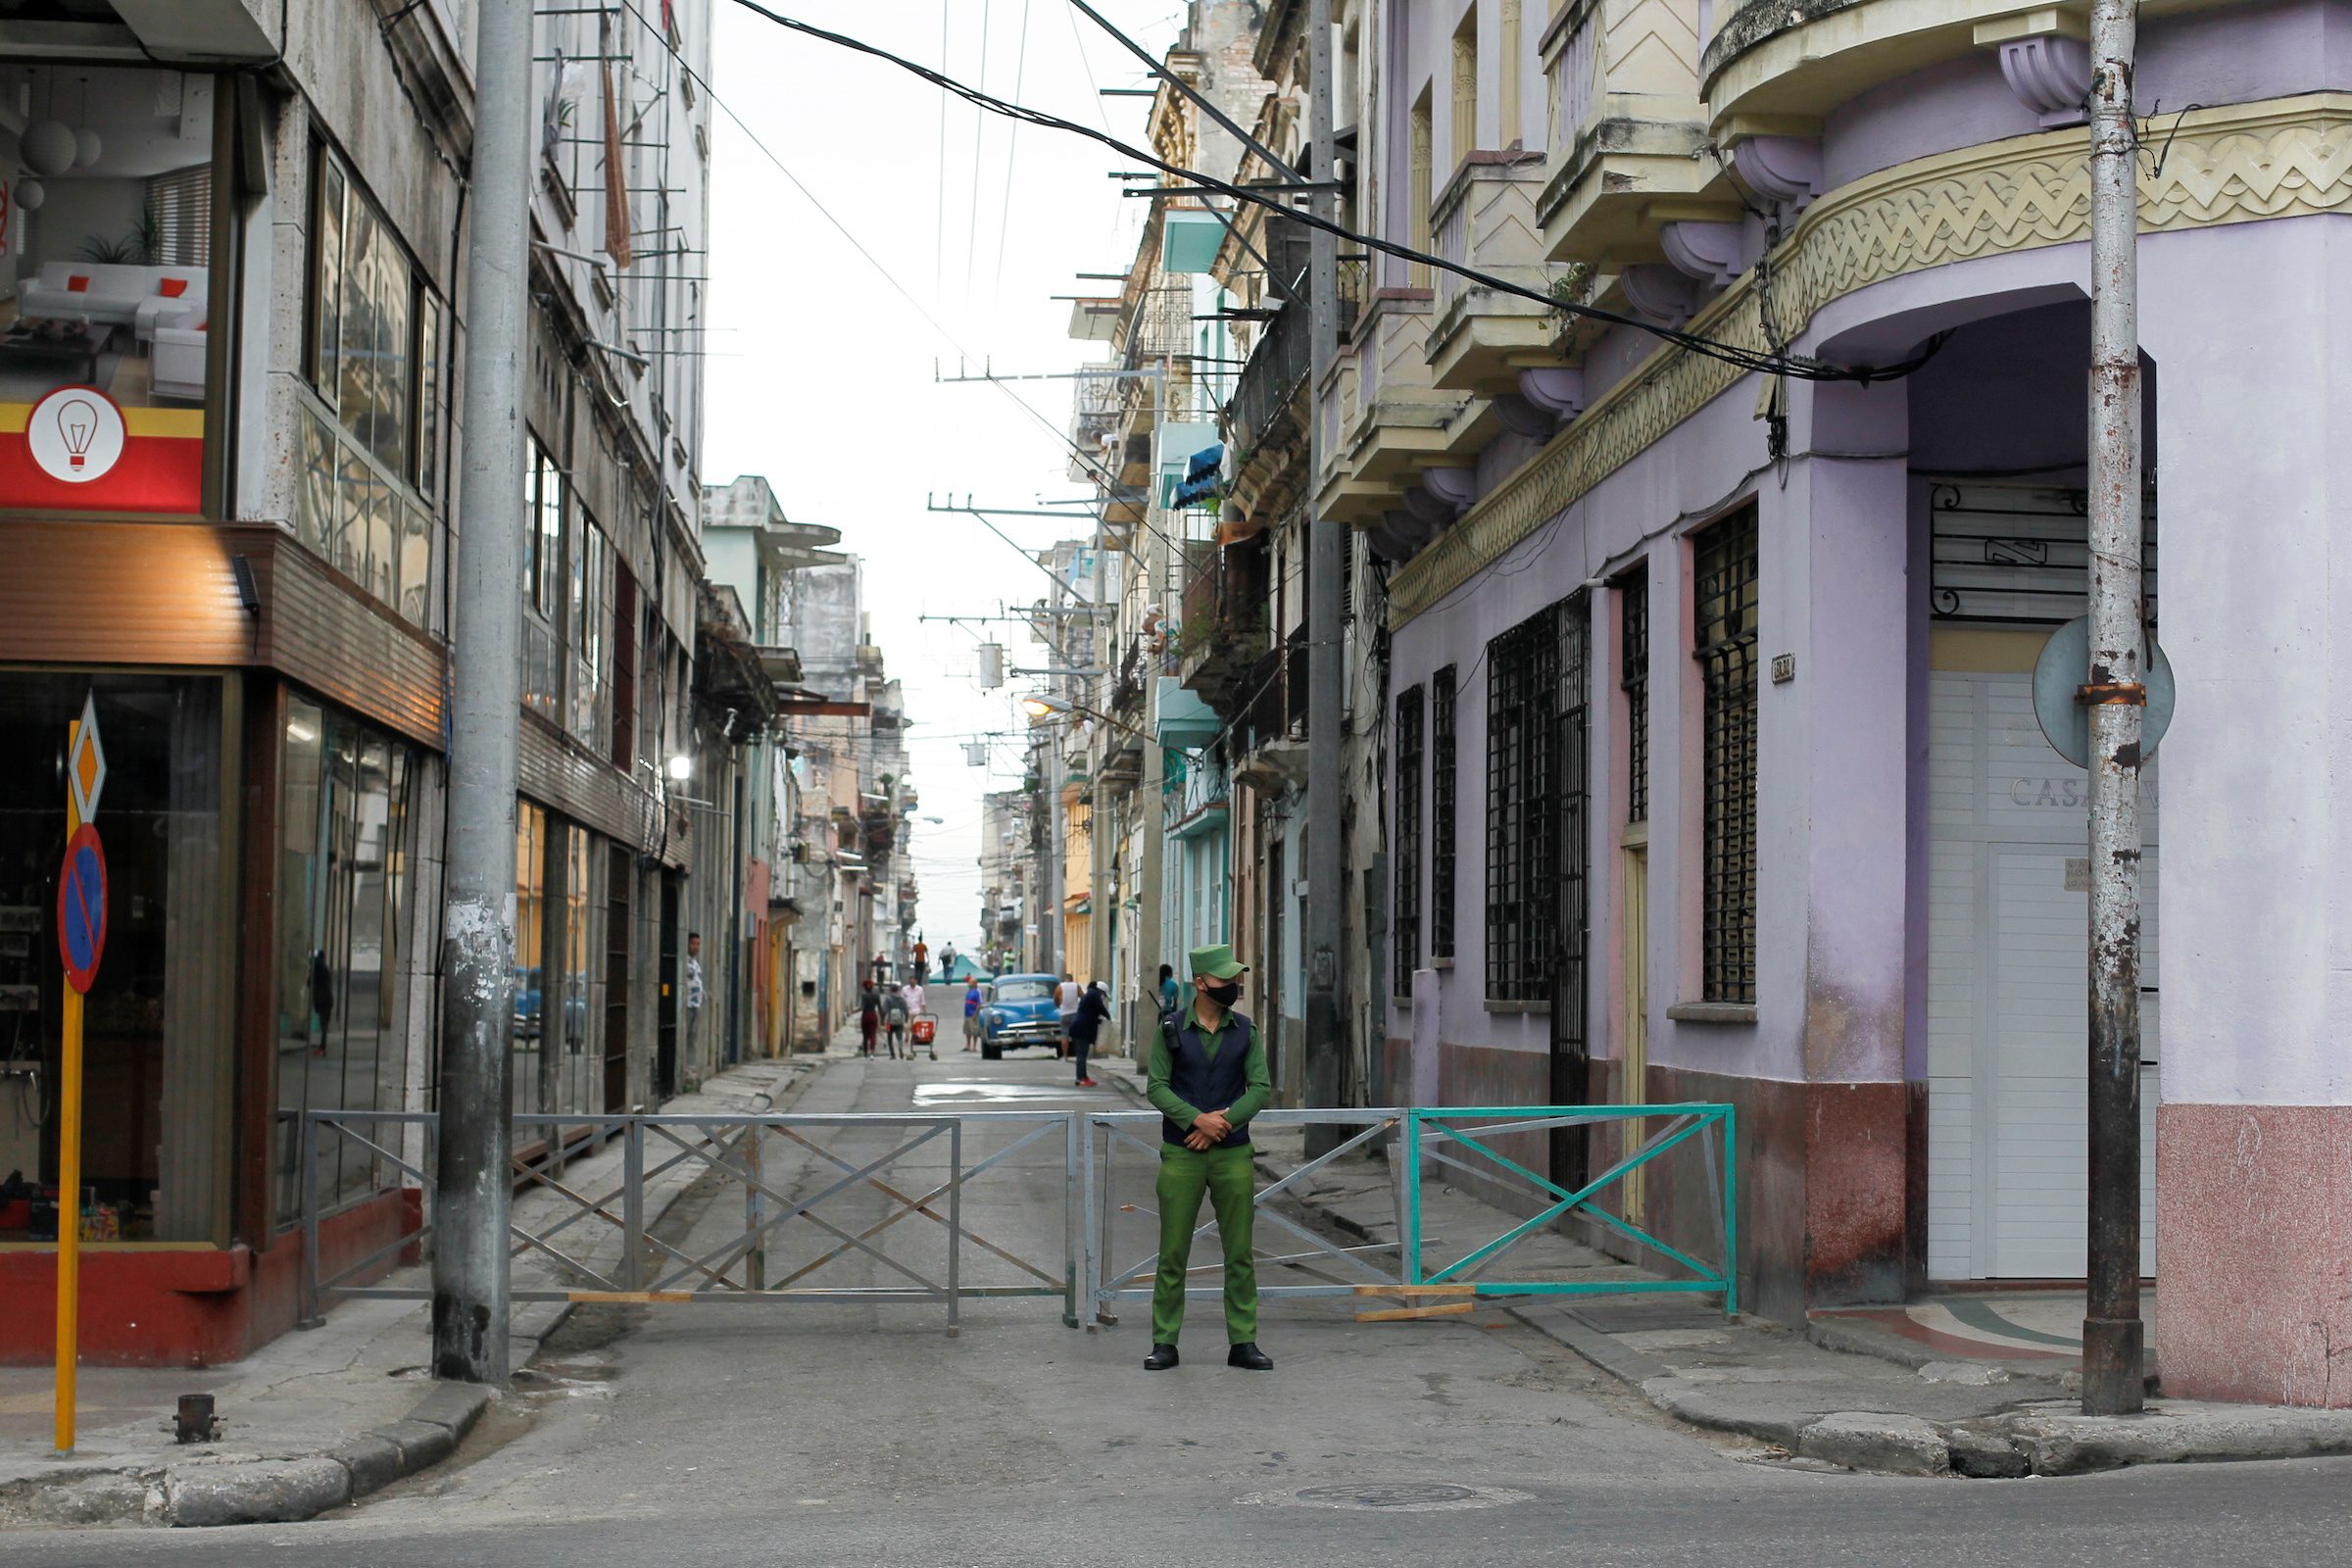 Cuban rules to allow more small businesses spark hope and frustration